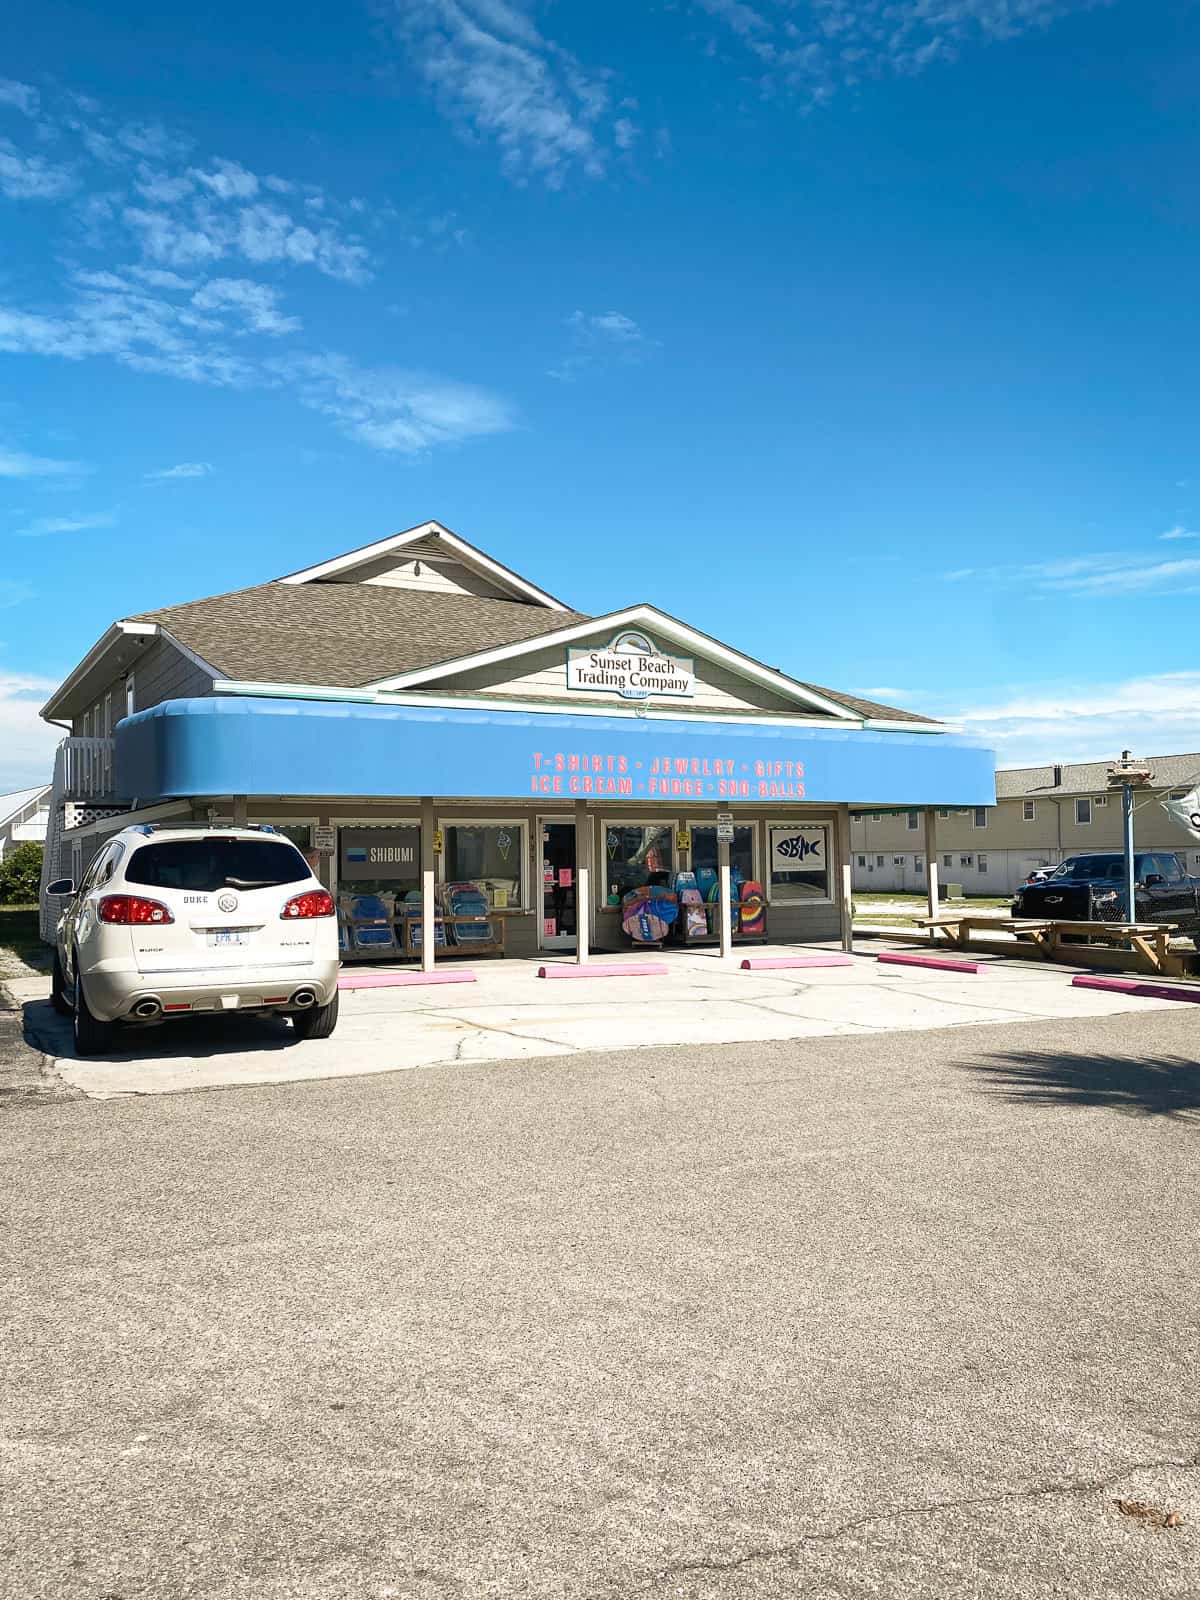 A blue building with a bright blue sky and  a car in front. The Sunset Beach Trading Company